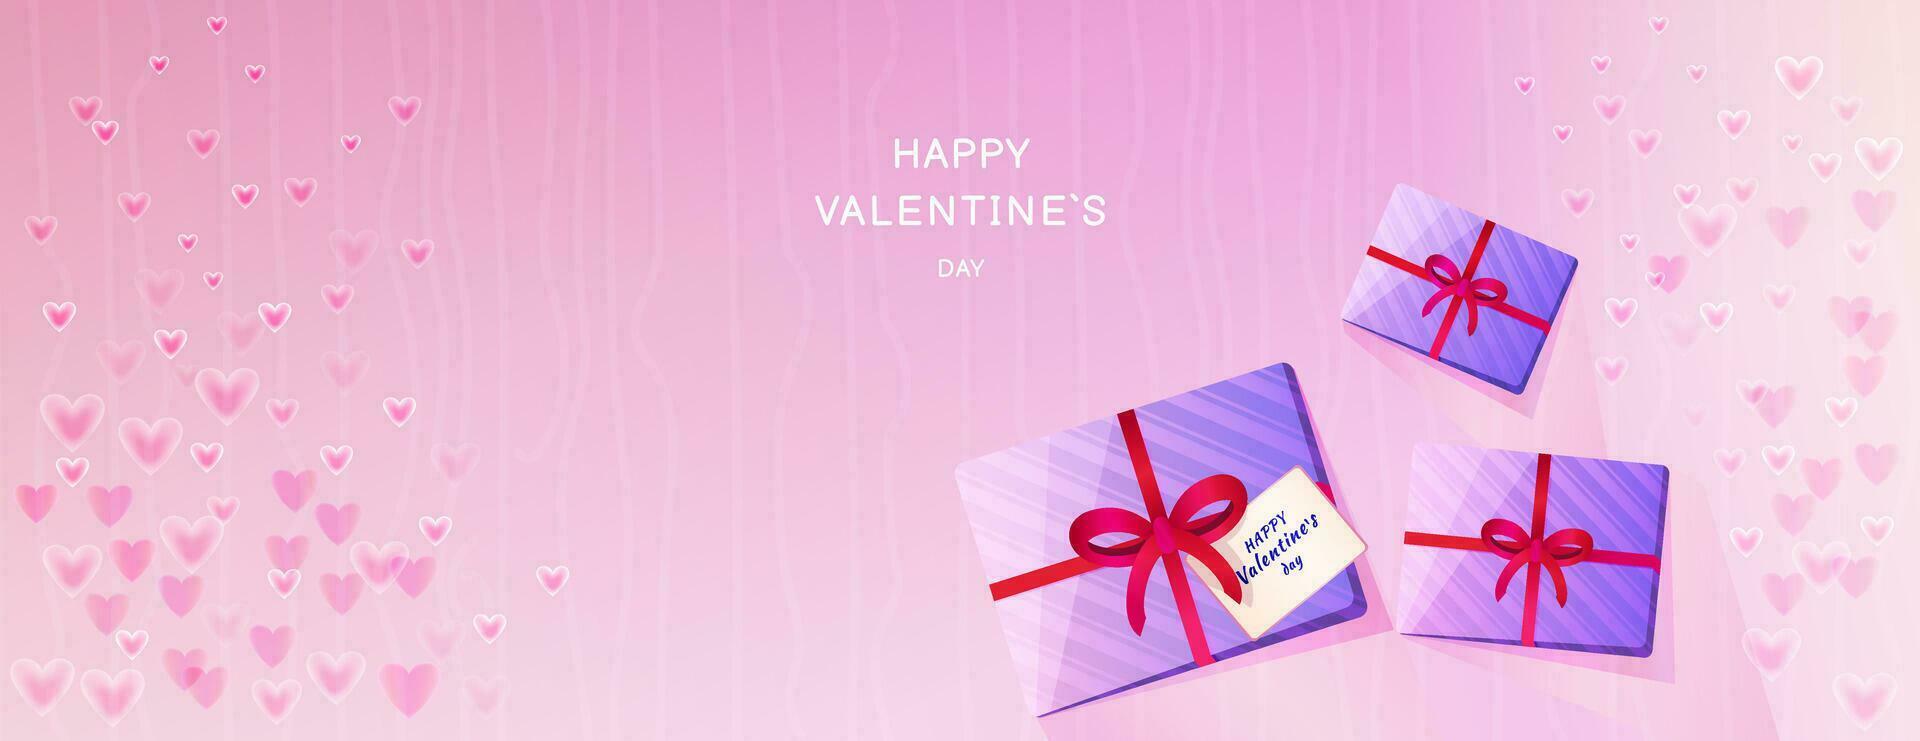 Bright banner happy Valentines day. Horizontal border with copy space. Vector illustration stylized shine, smooth, smoke hearts, cute gift box on the pink background. Suitable for email header, post